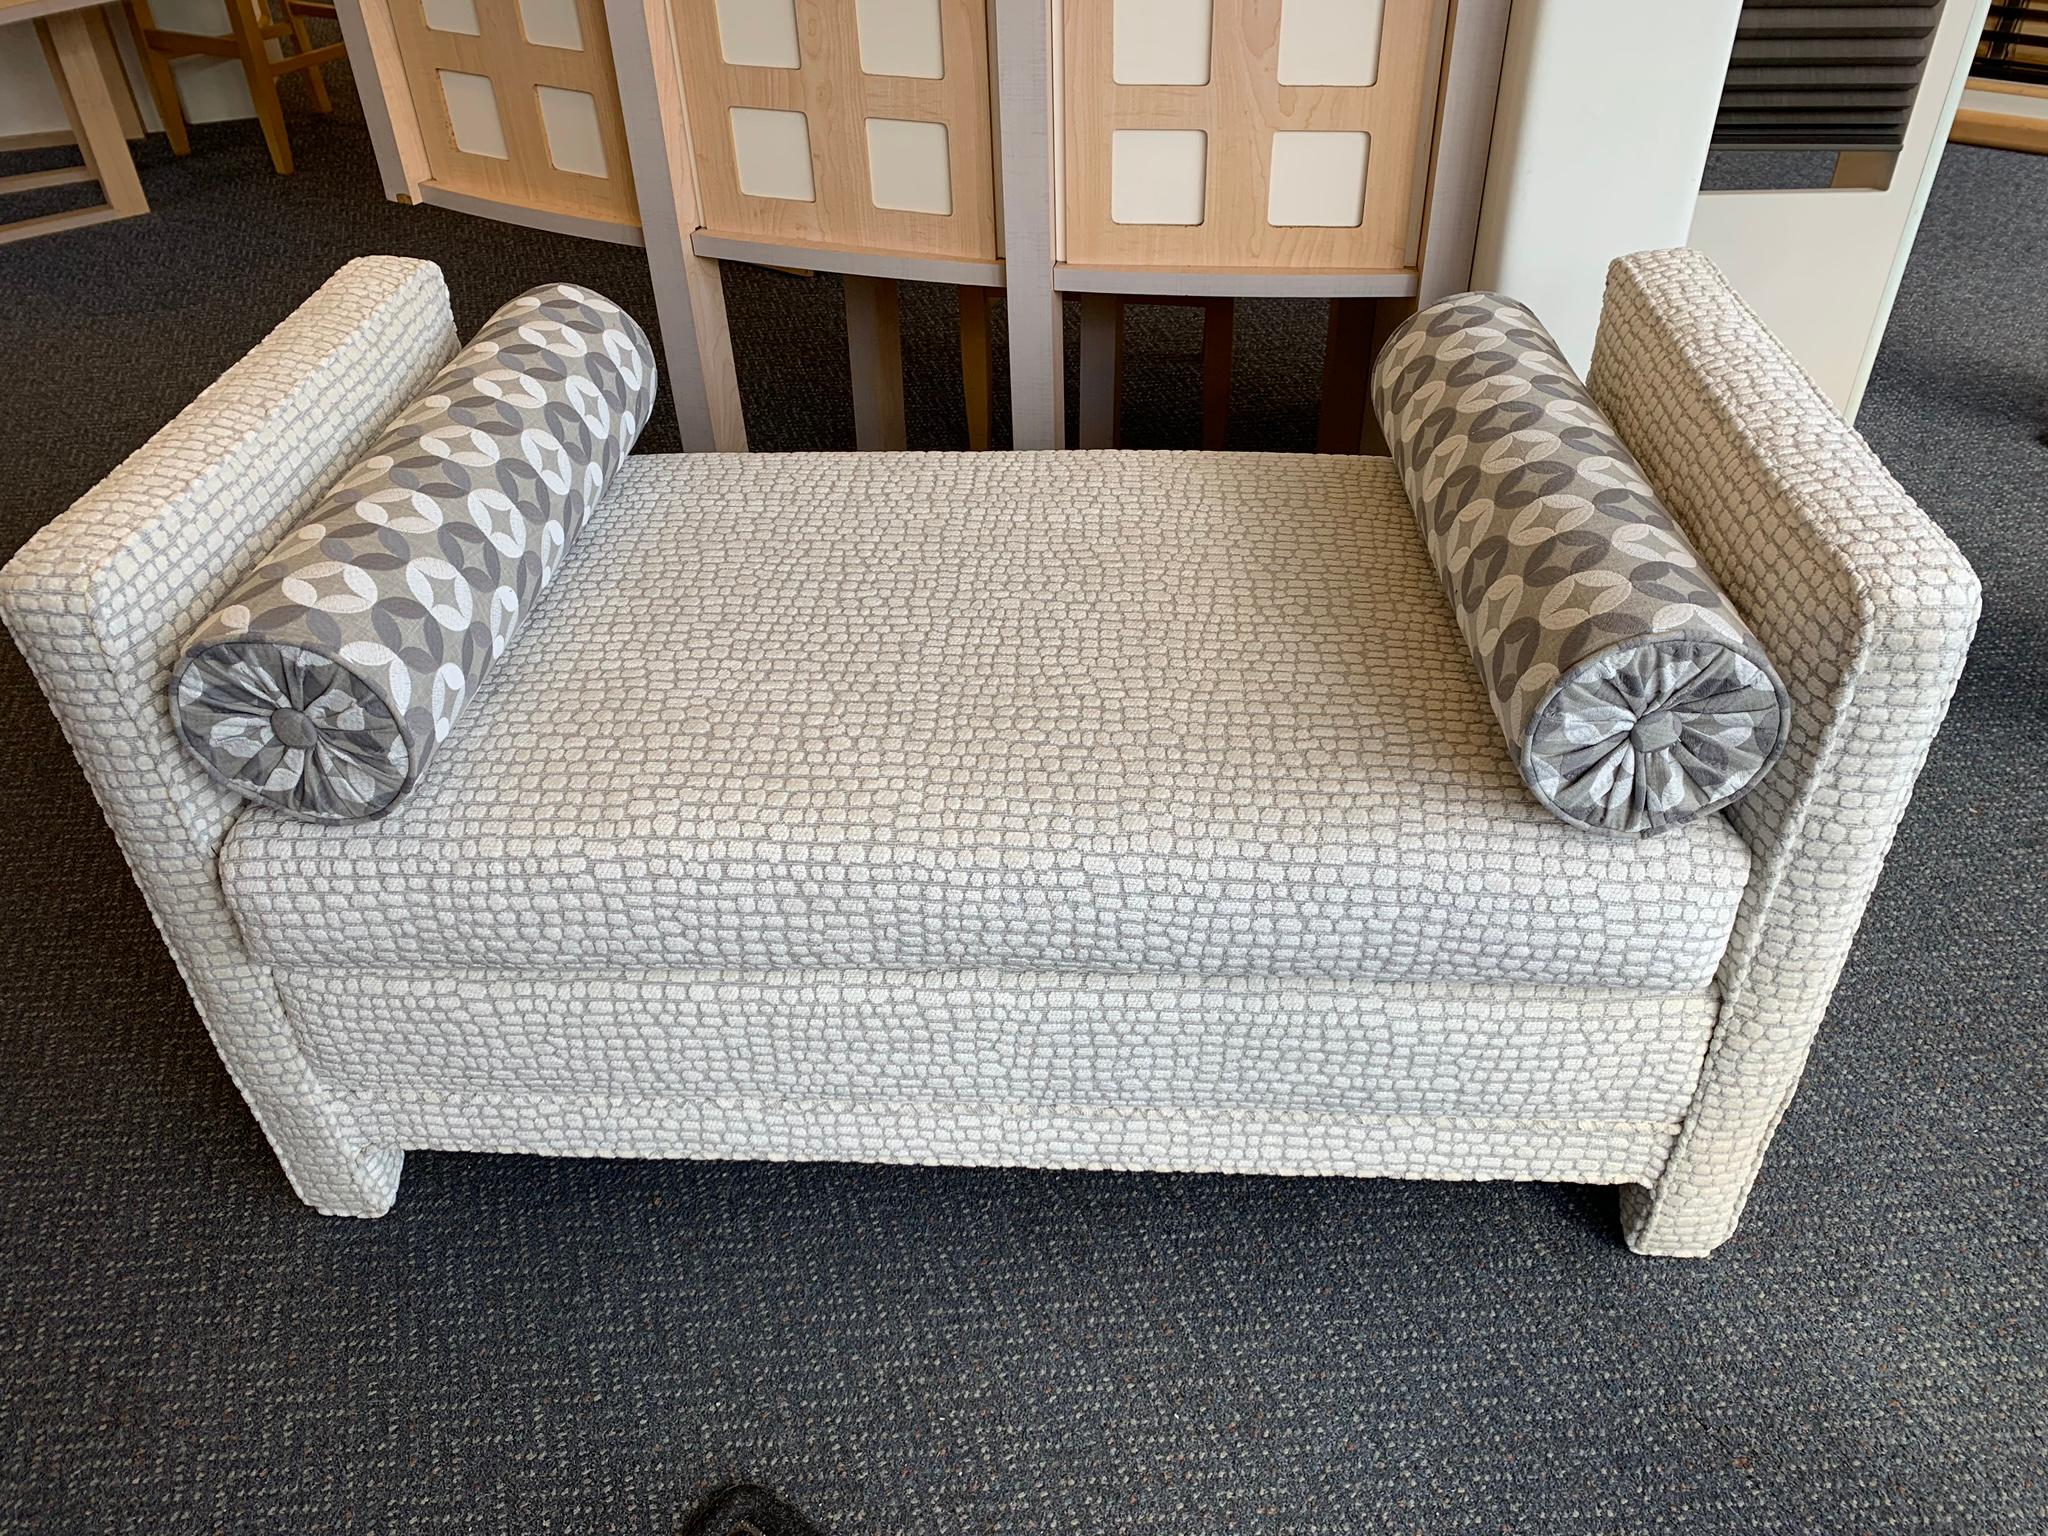 Wonderful vintage settee bench that was just completely updated with fabulous Fabricut Rapido Skin upholstery and coordinating bolsters in Fabricut Quartral. The upholstery is soft and has the feel of chenille. I.